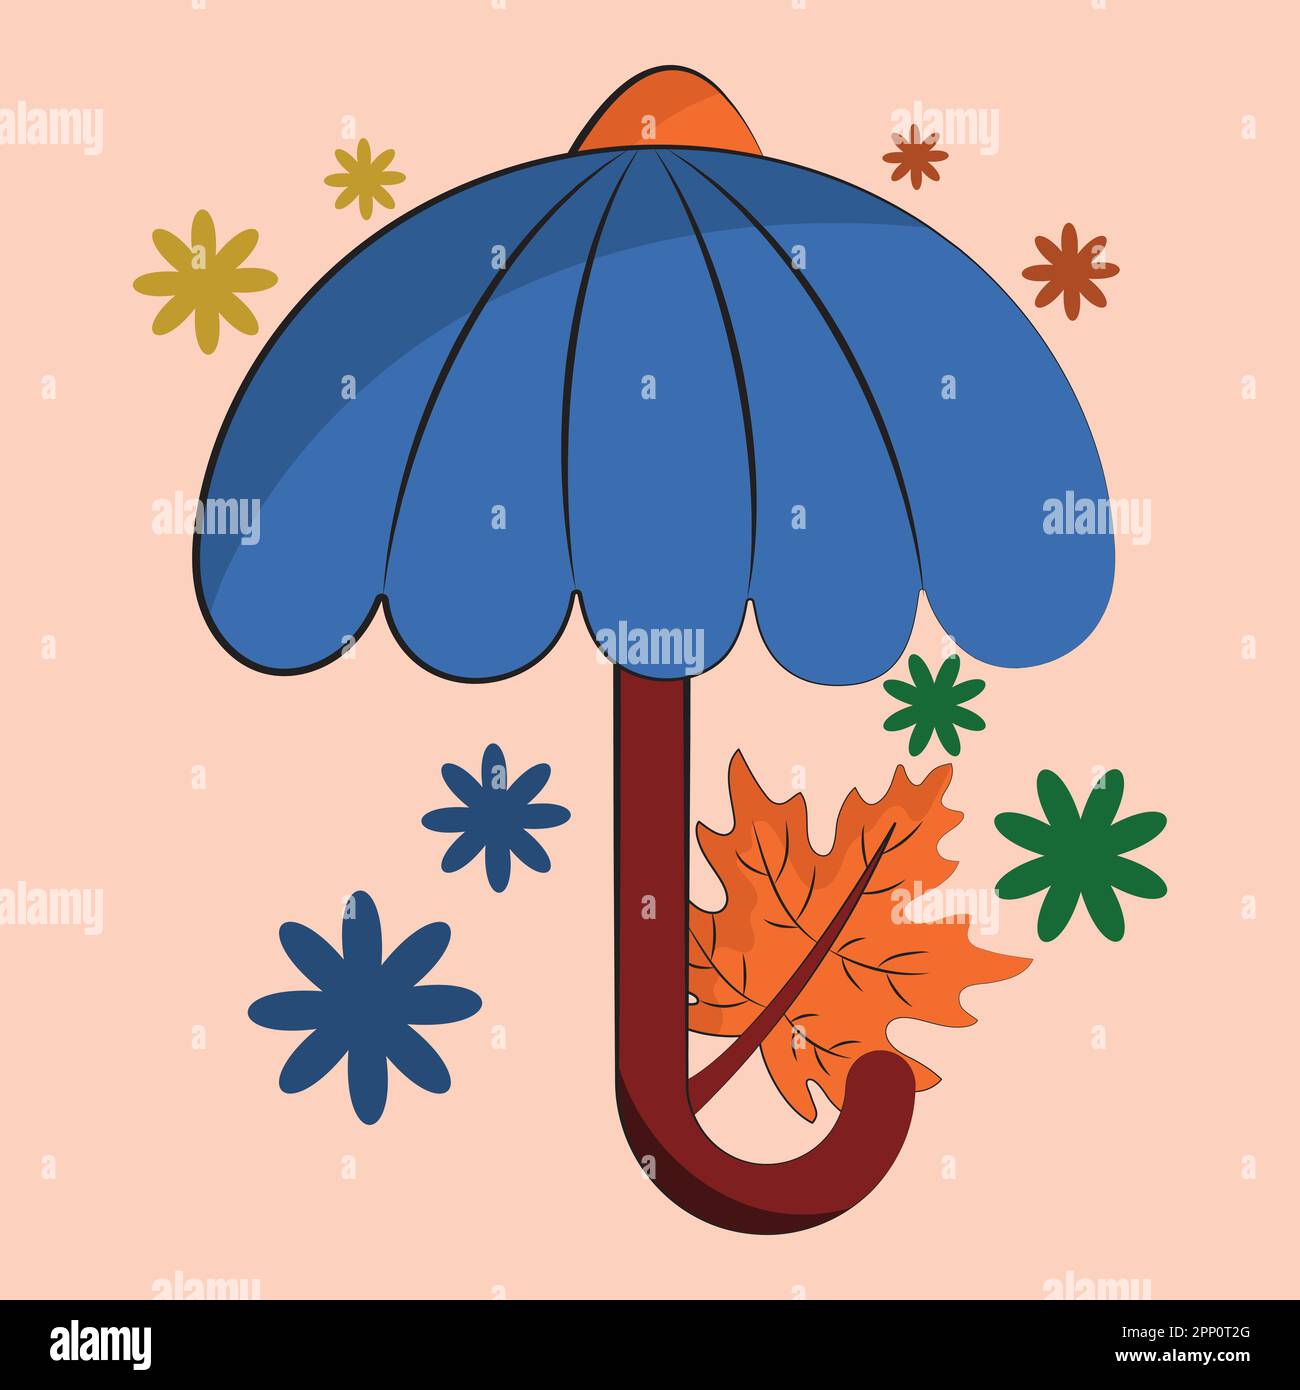 Open Umbrella With Maple Leaf And Flowers On Peach Background. Stock Vector